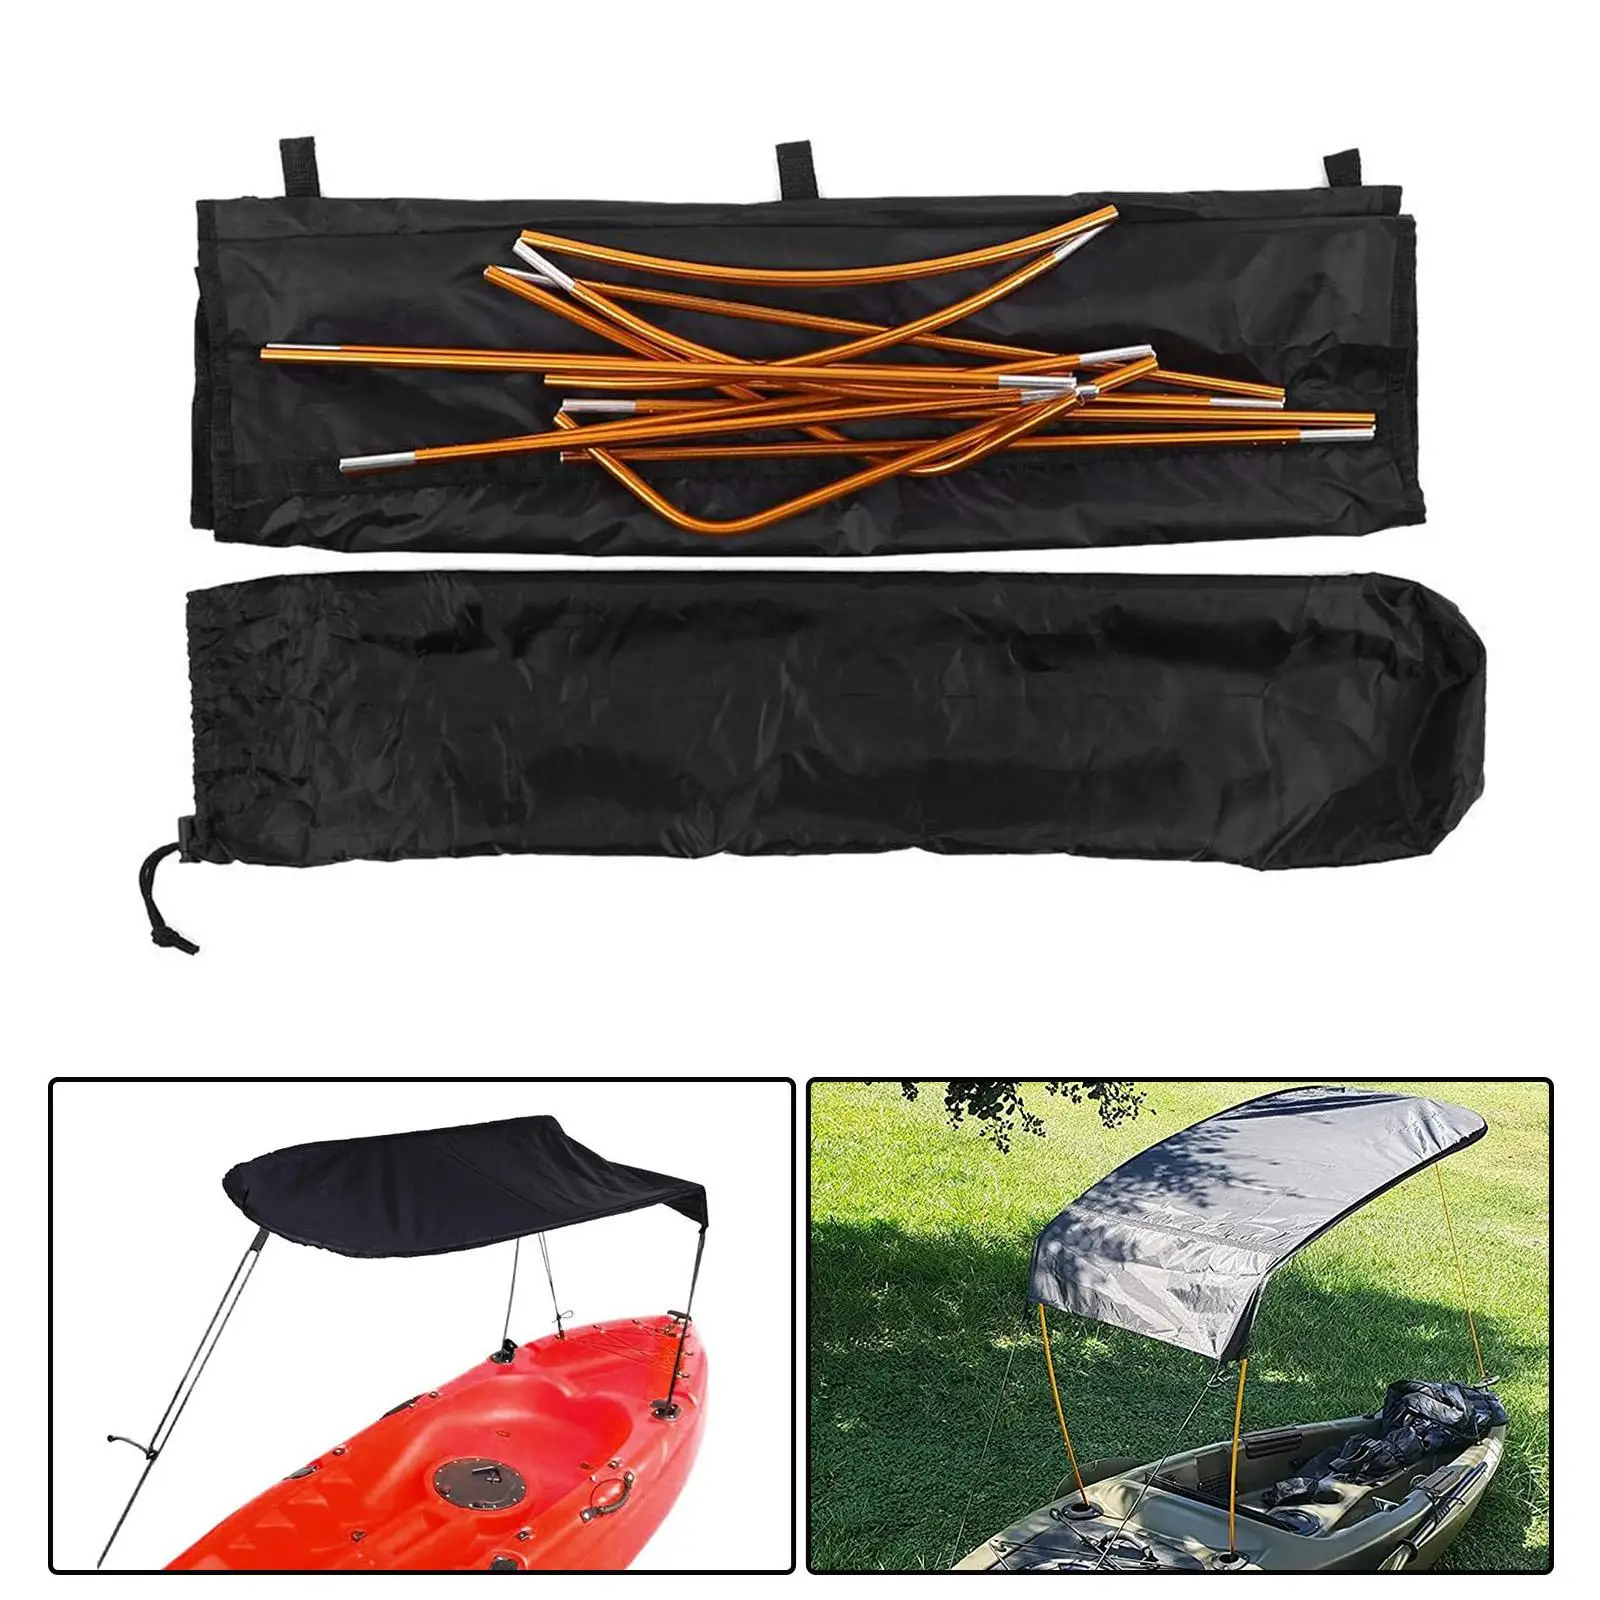 Rainproof Boat Sun Shelter Awning Top Cover Canopy Tent Portable for Picnic